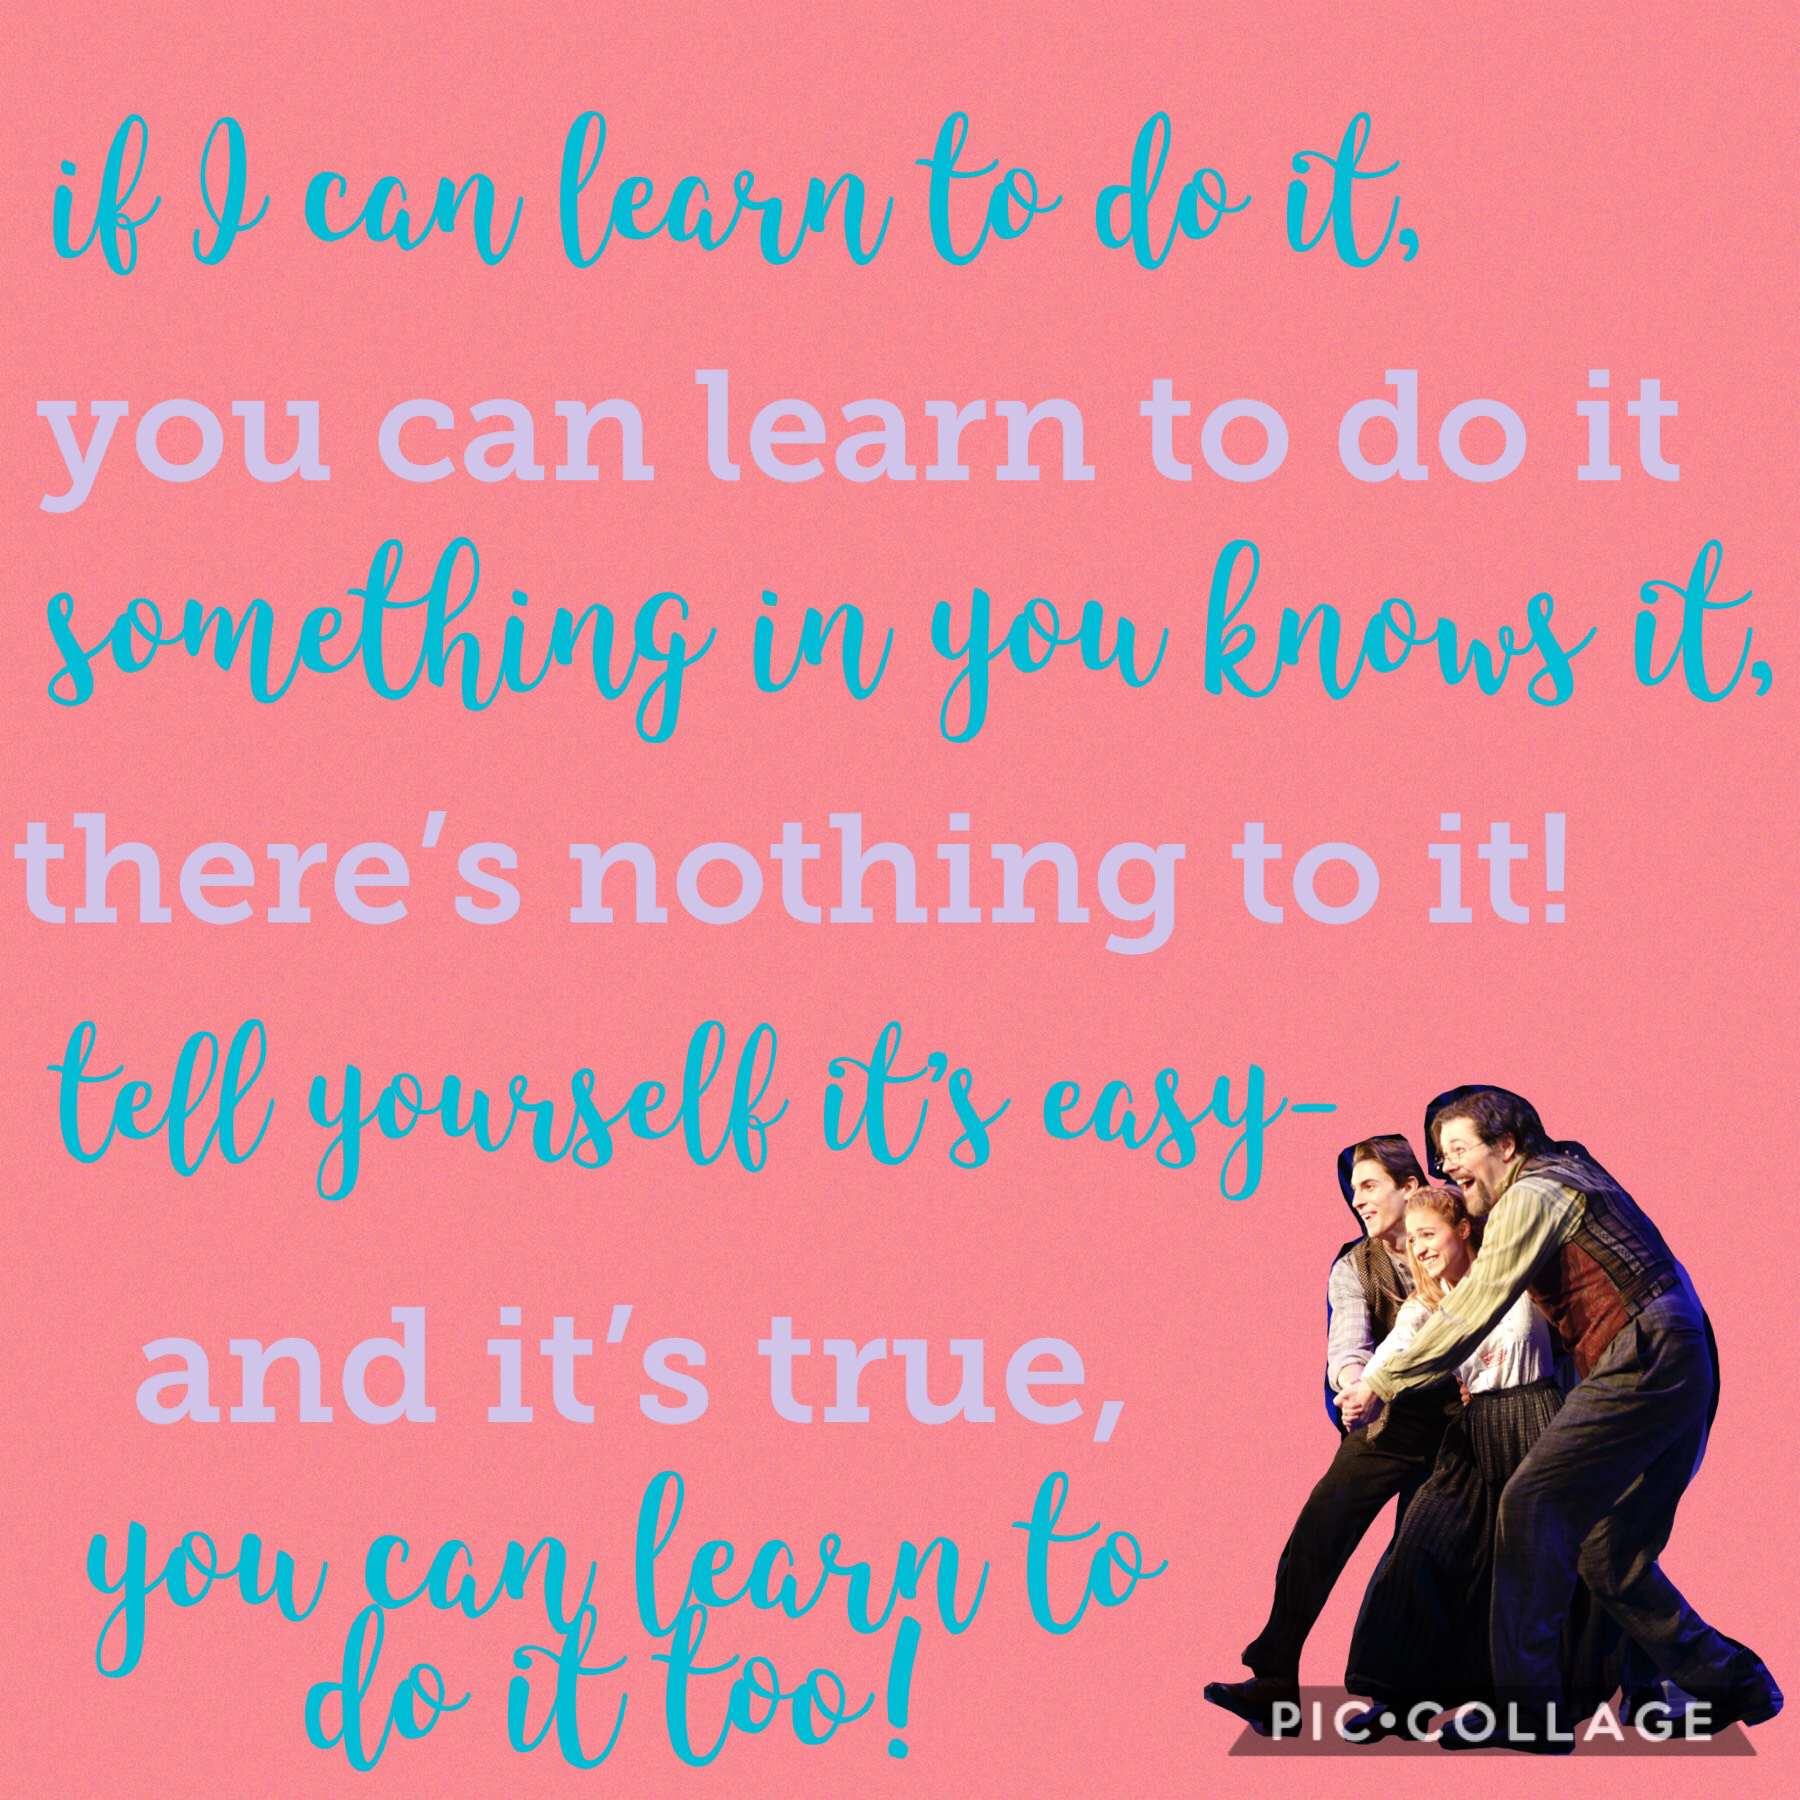 Learn to Do It is one of my favorite songs!